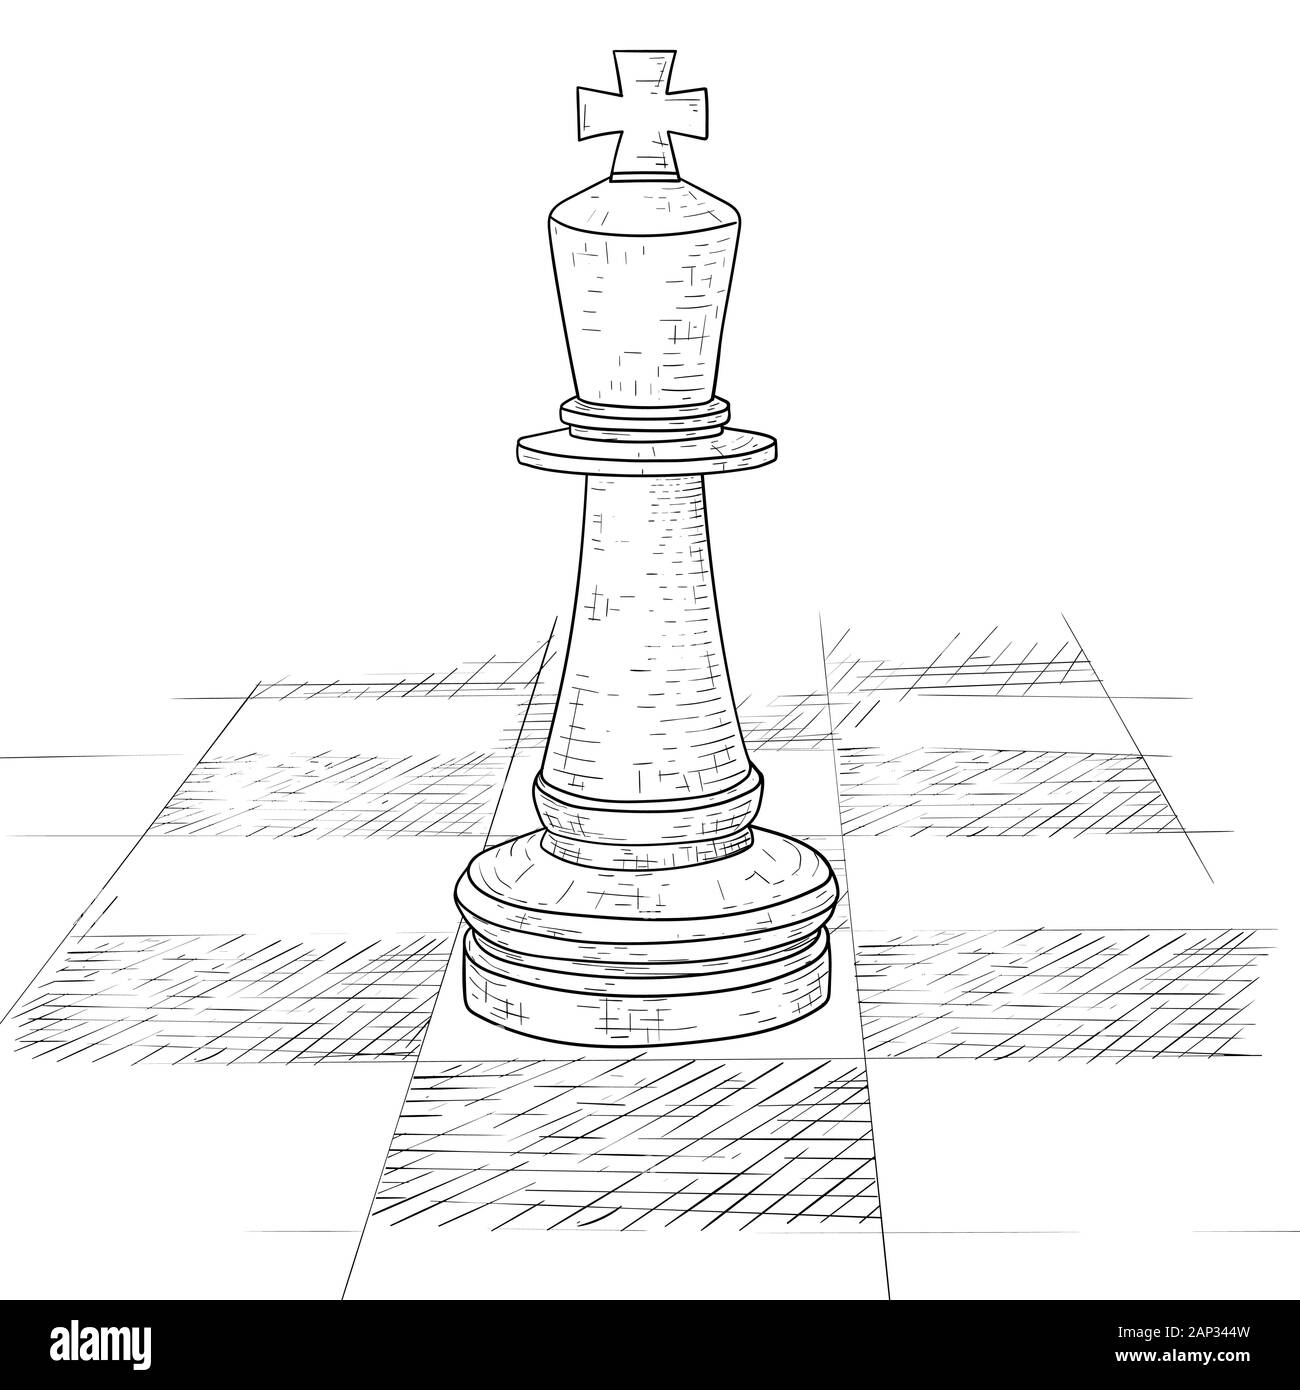 Chess Pieces Drawing - Easy Chess Piece Drawing - Free Transparent